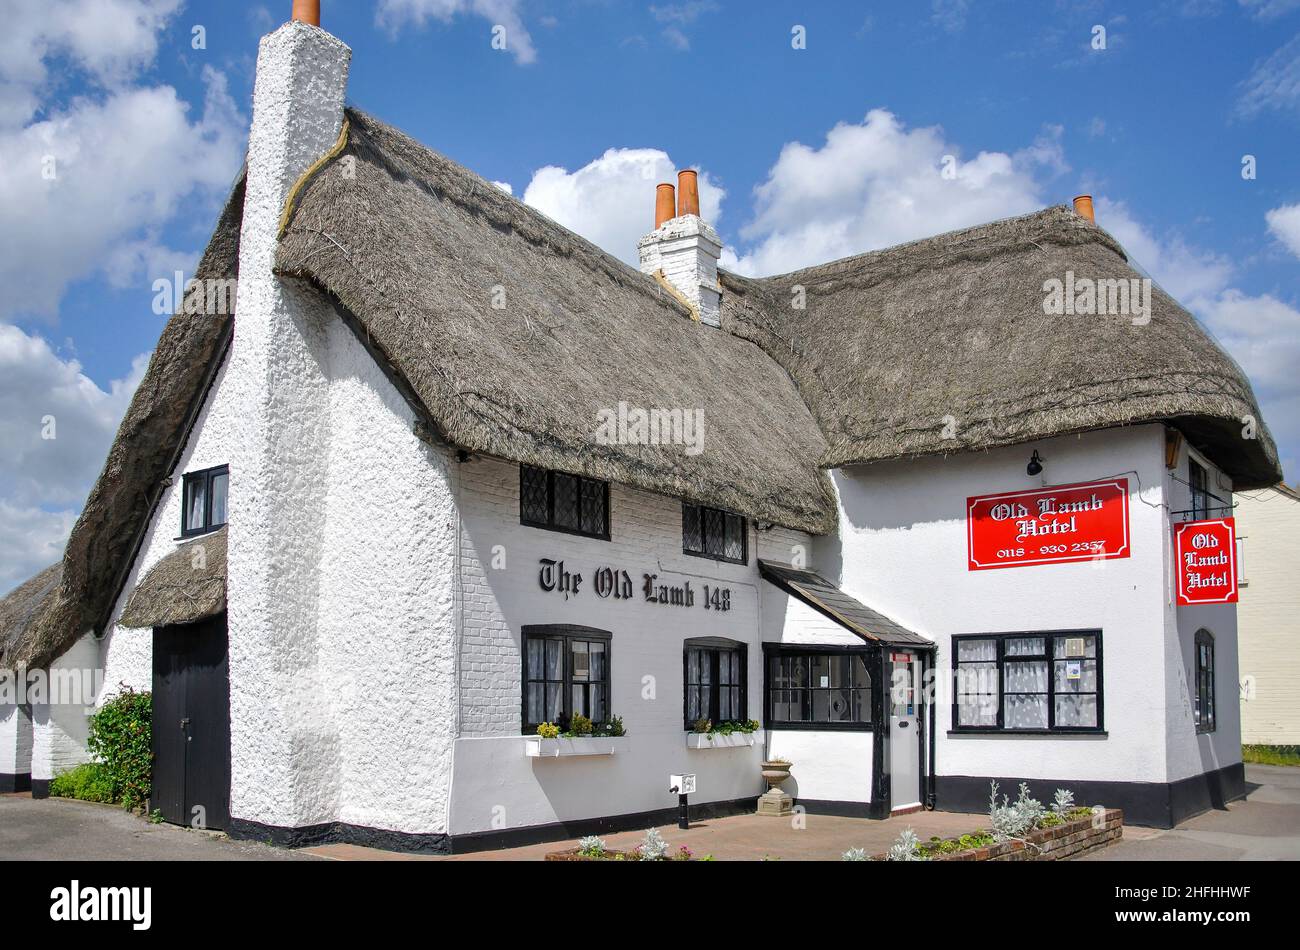 Thatched Old Lamb Hotel, Church Street, Theale, Berkshire, England, United Kingdom Stock Photo